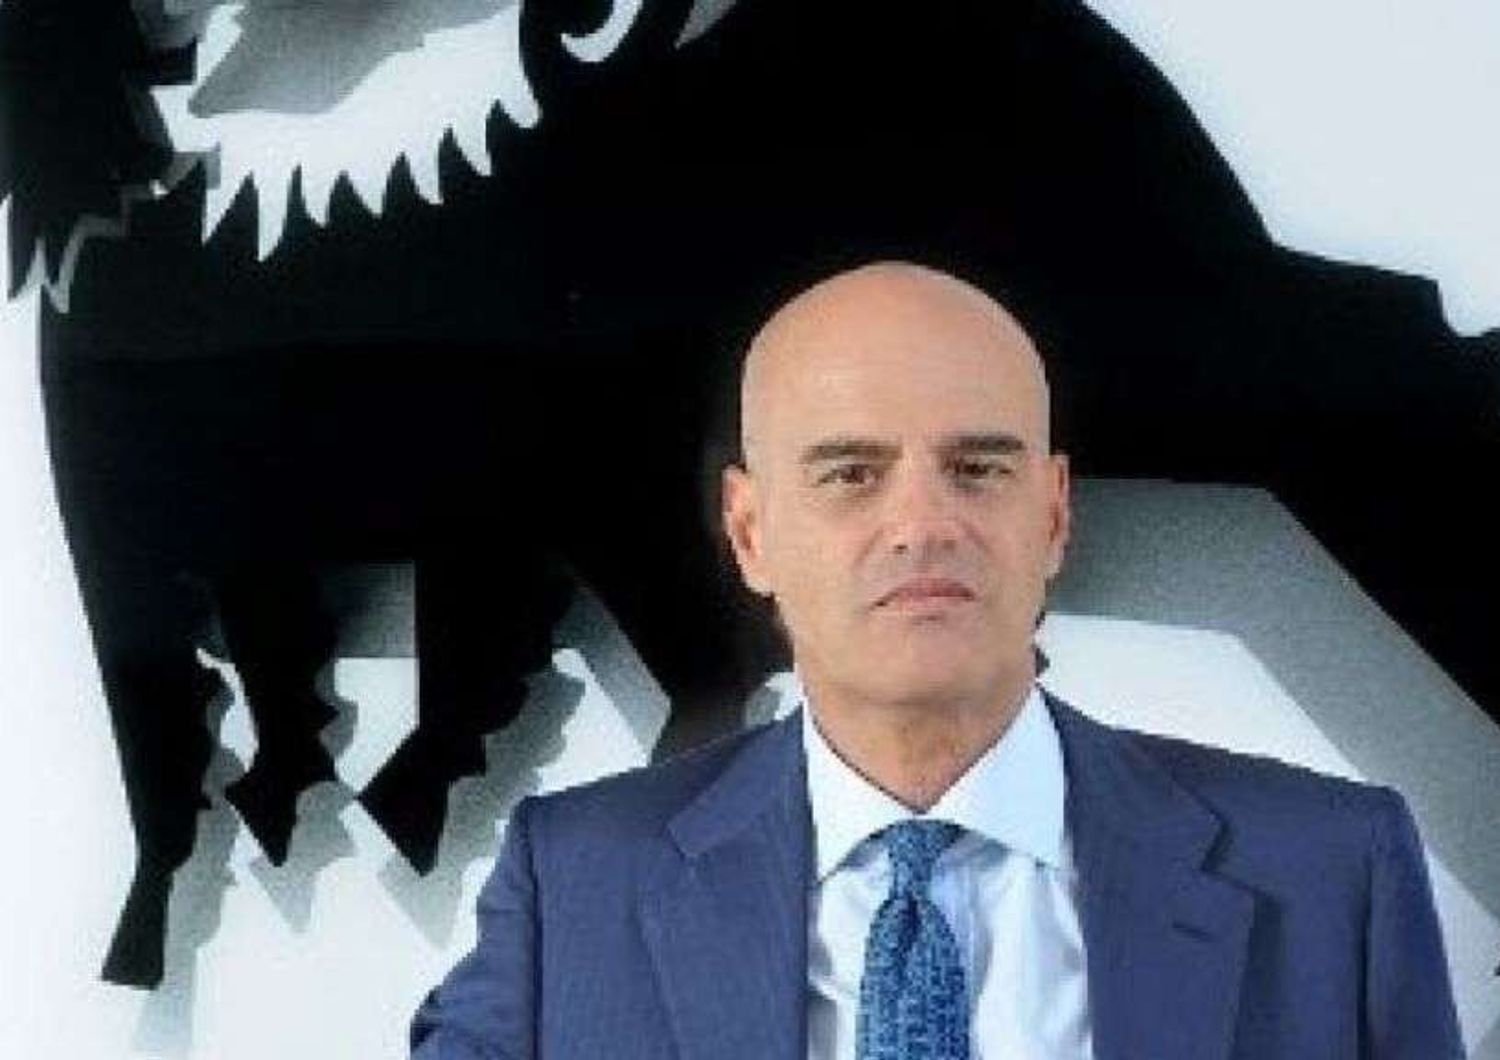 Eni does not intend to leave Sicily, says CEO Descalzi